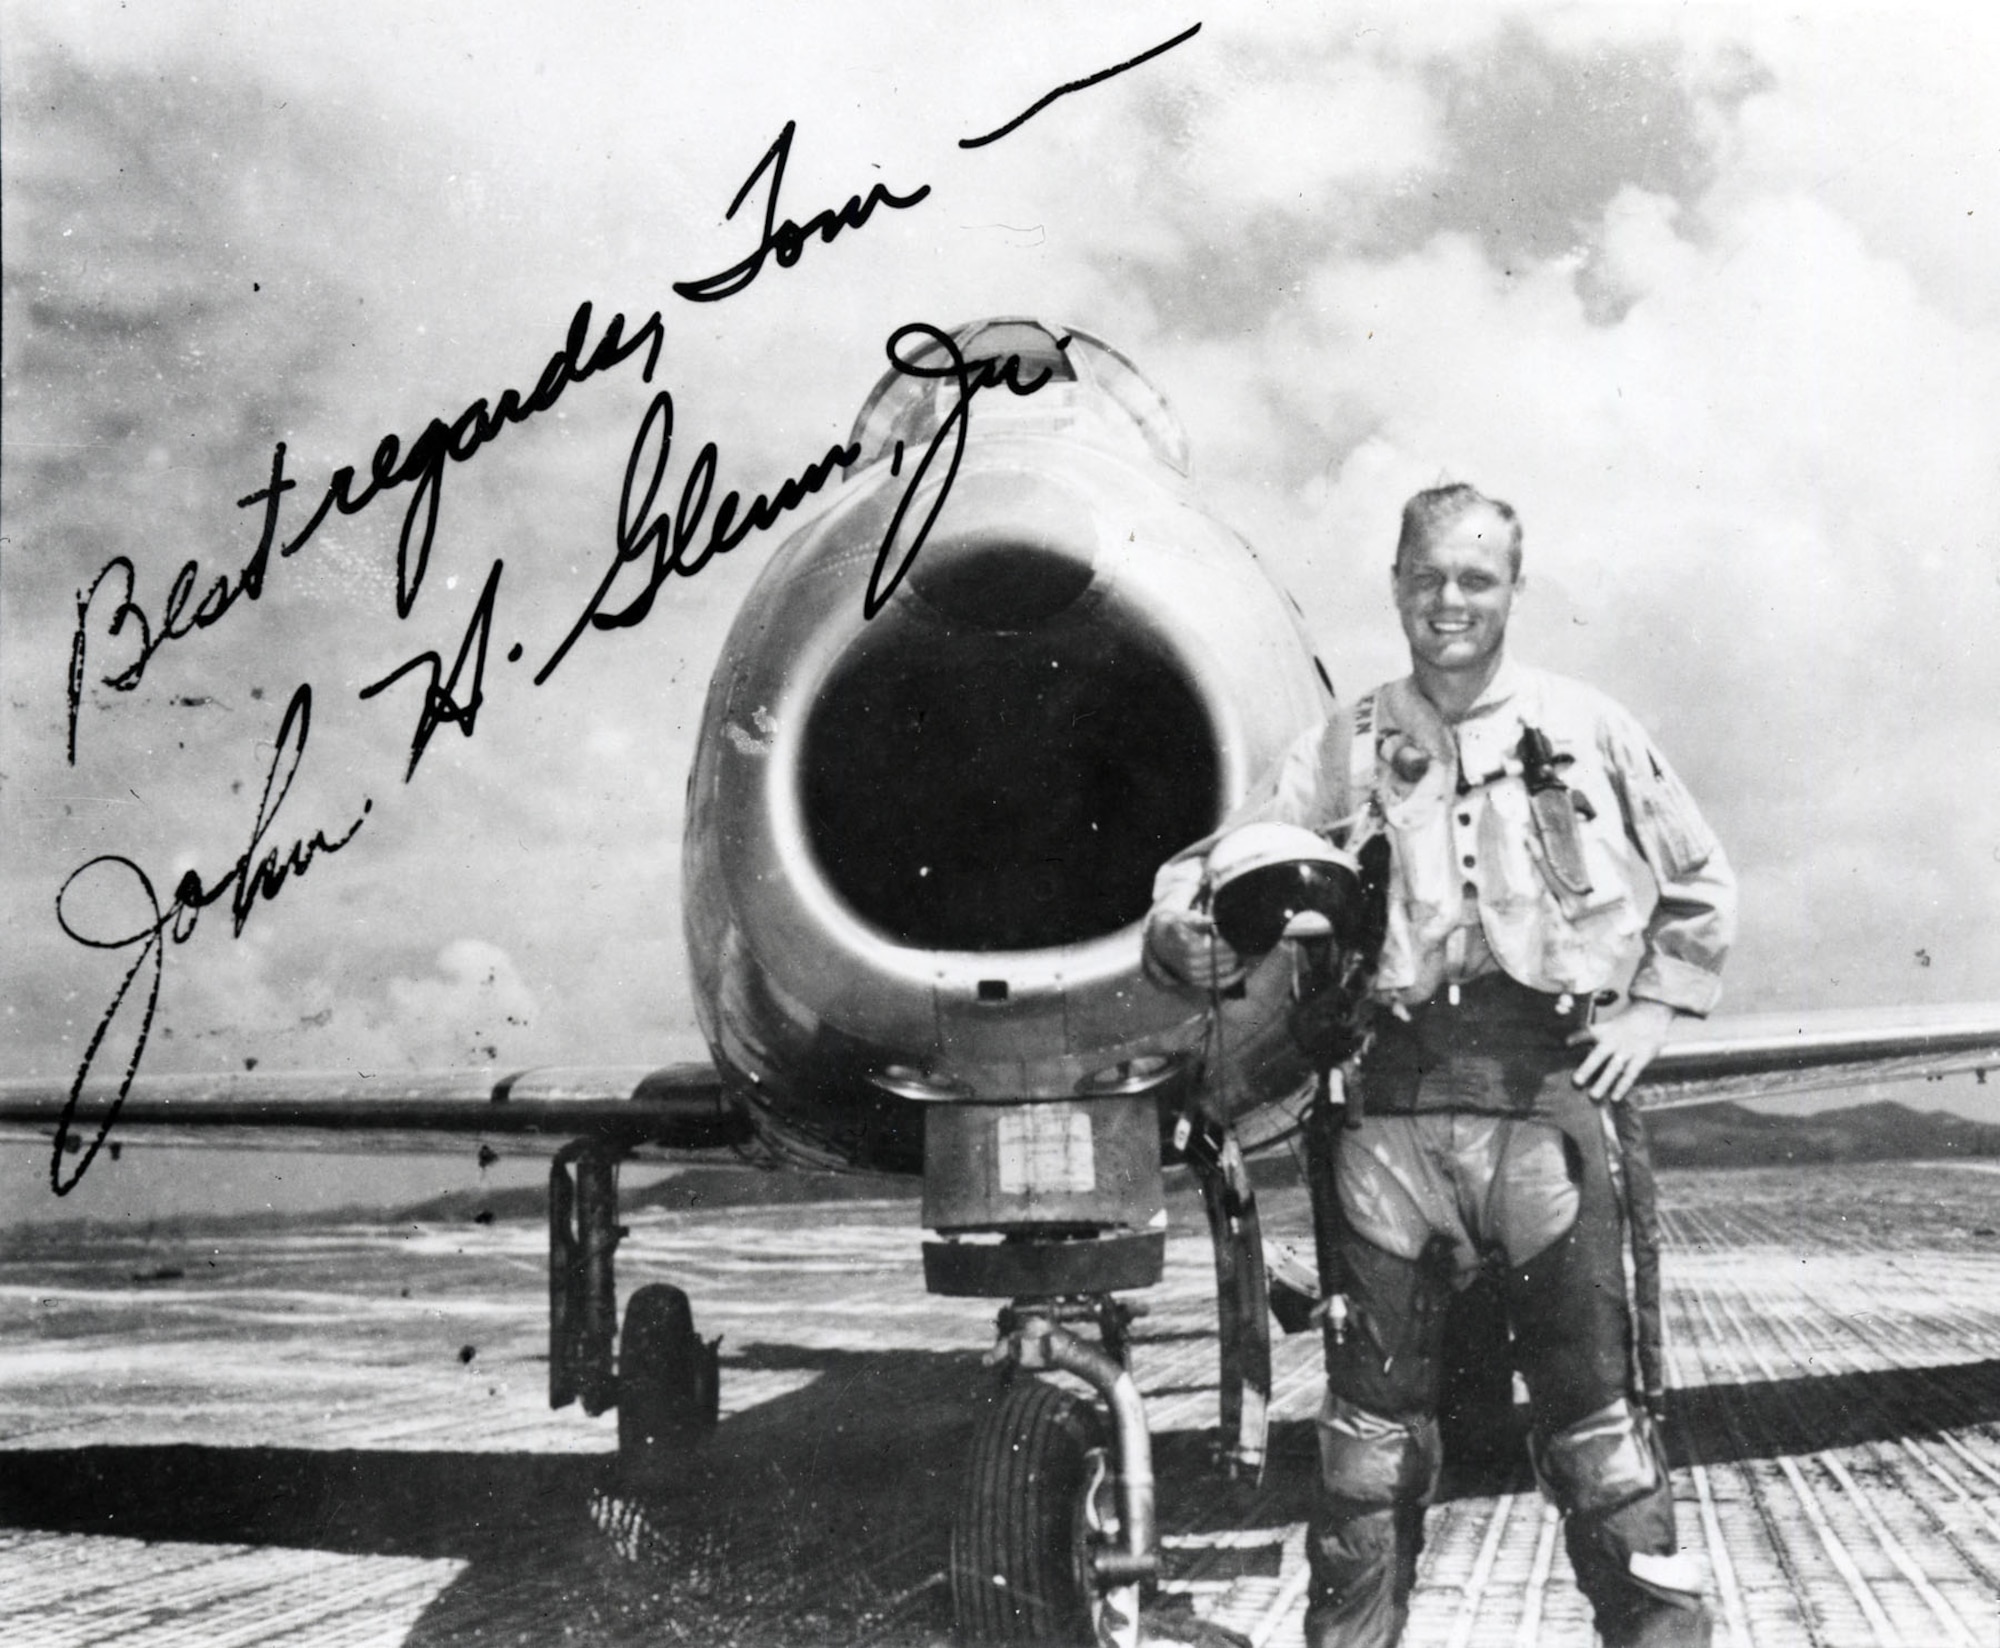 Wearing combat survival gear, John Glenn stands in front of his F-86F. The original photograph was autographed by Glenn to Tom Bartlett, an enlisted man in the 1st Marine Aircraft Wing who took the photo at K-3 airfield, Korea. (U.S. Air Force photo)